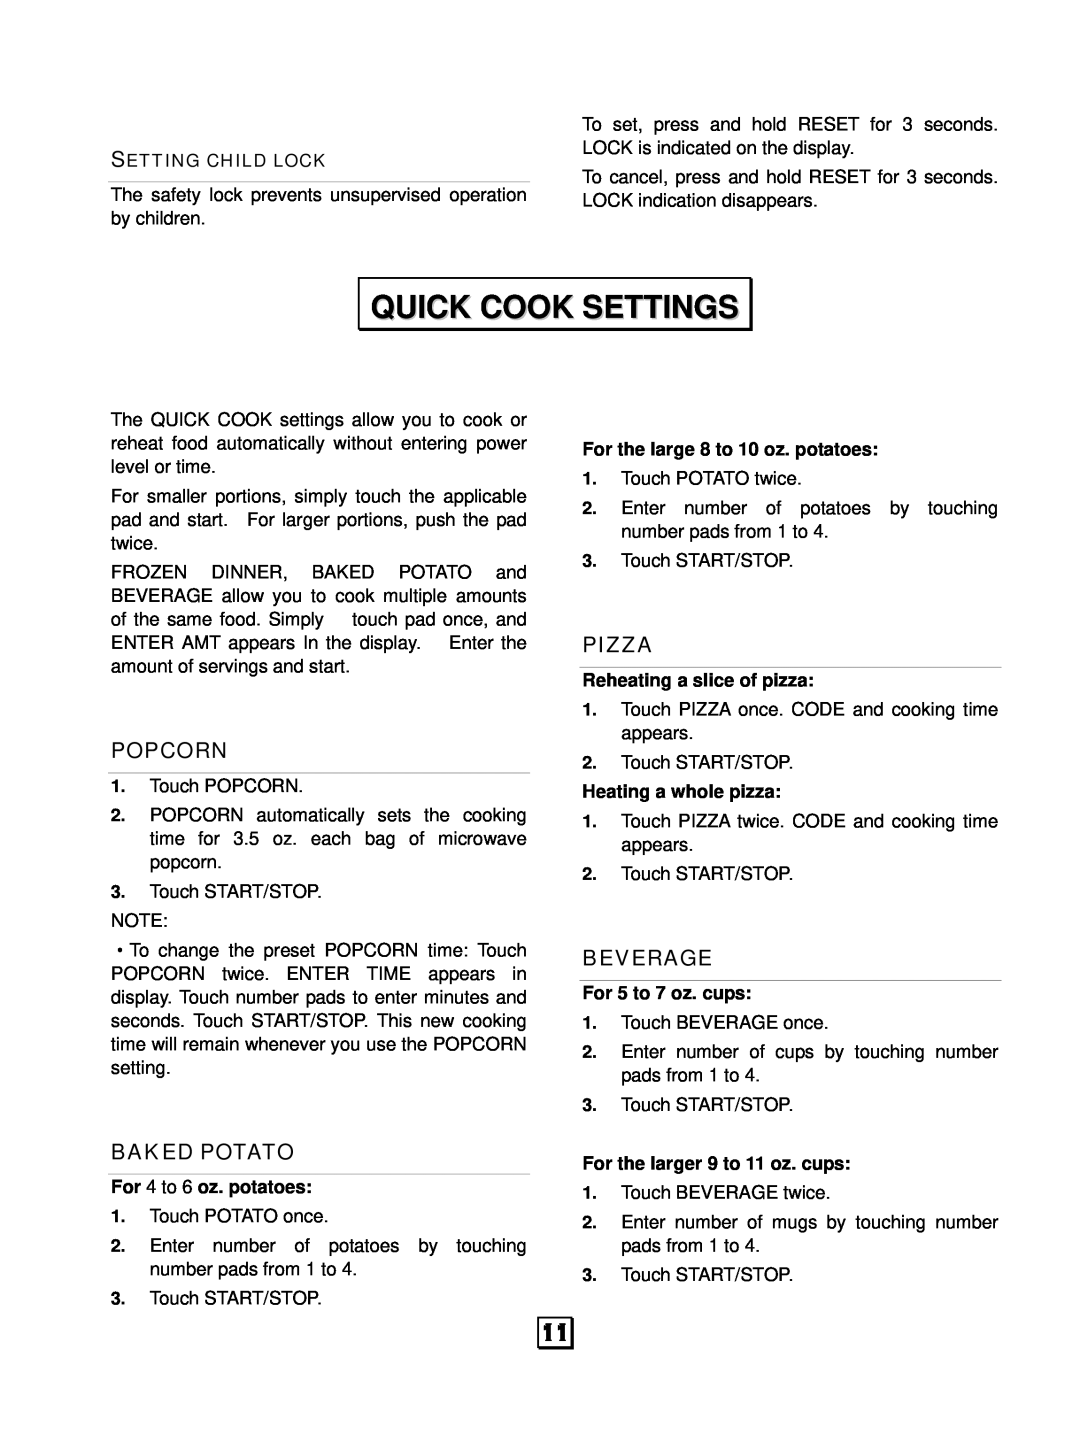 RCA RMW1143 owner manual Quick Cook Settings, Popcorn, Baked Potato, Pizza, Beverage 